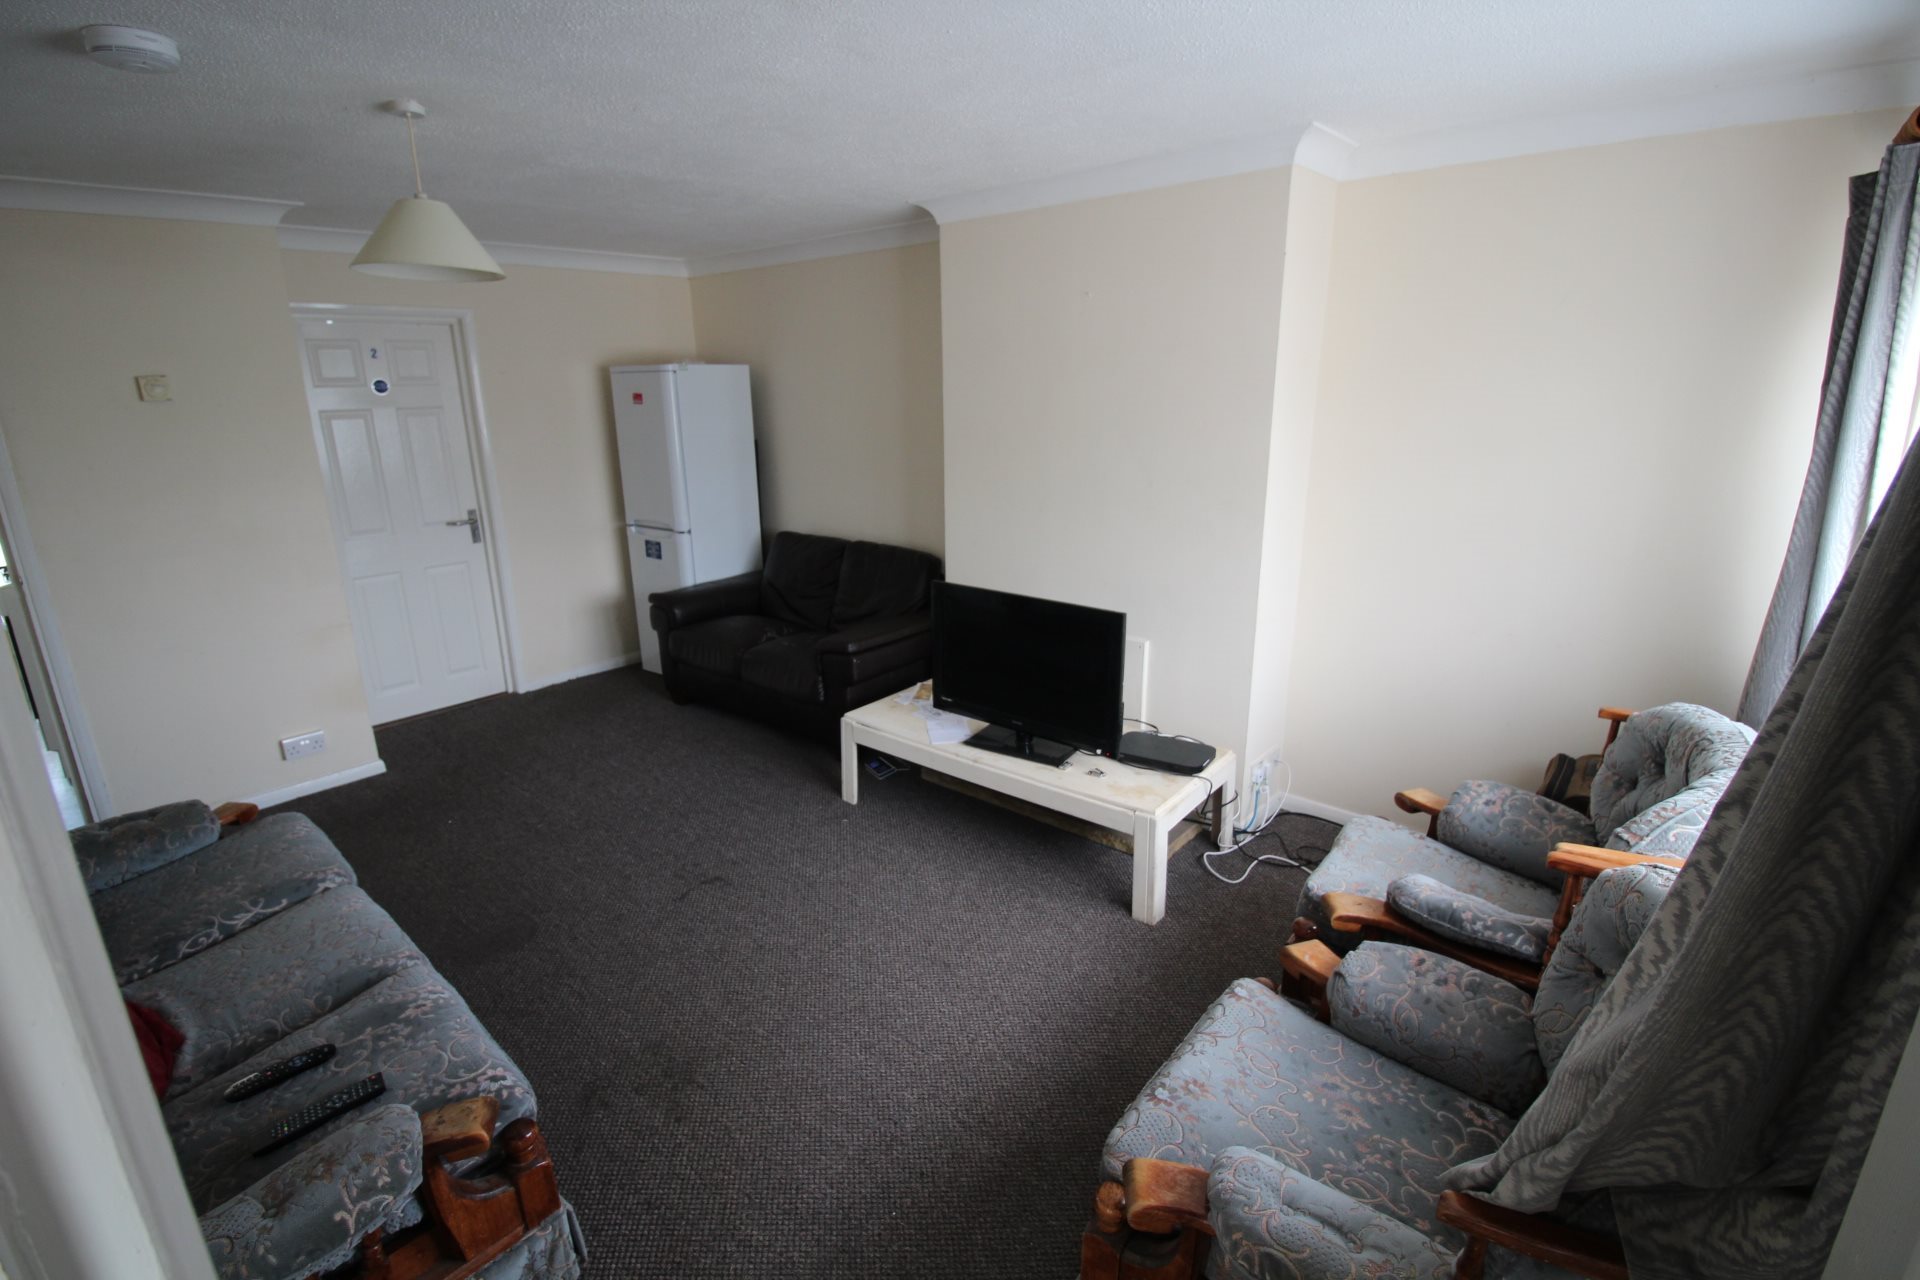 1 bed house / flat share to rent in Petworth Close, Wivenhoe 1